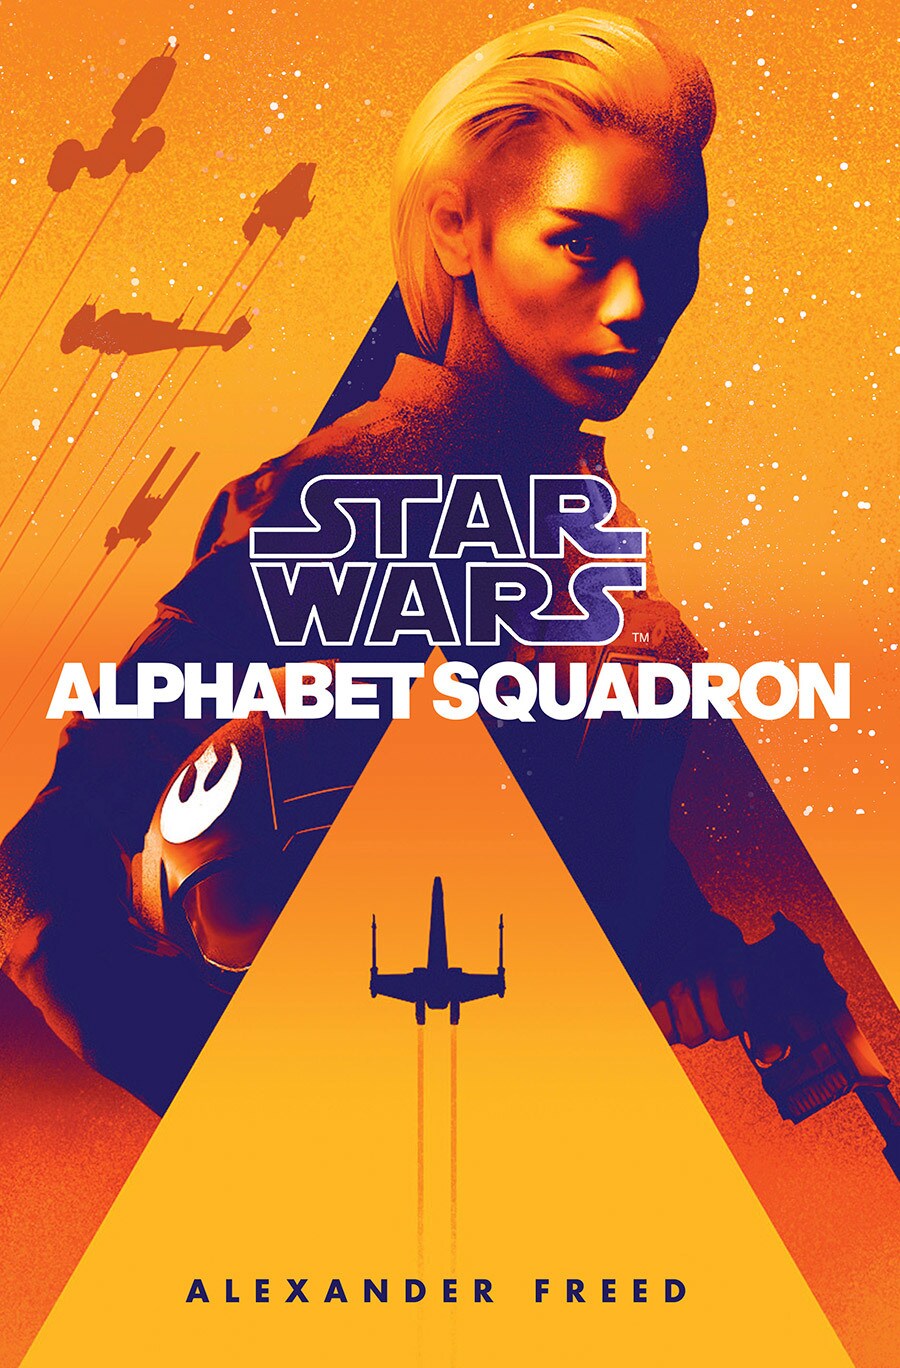 The cover of the novel Alphabet Squadron. Yrica Quell holds a helmet and pistol above a silhouette of an X-wing flying skyward.